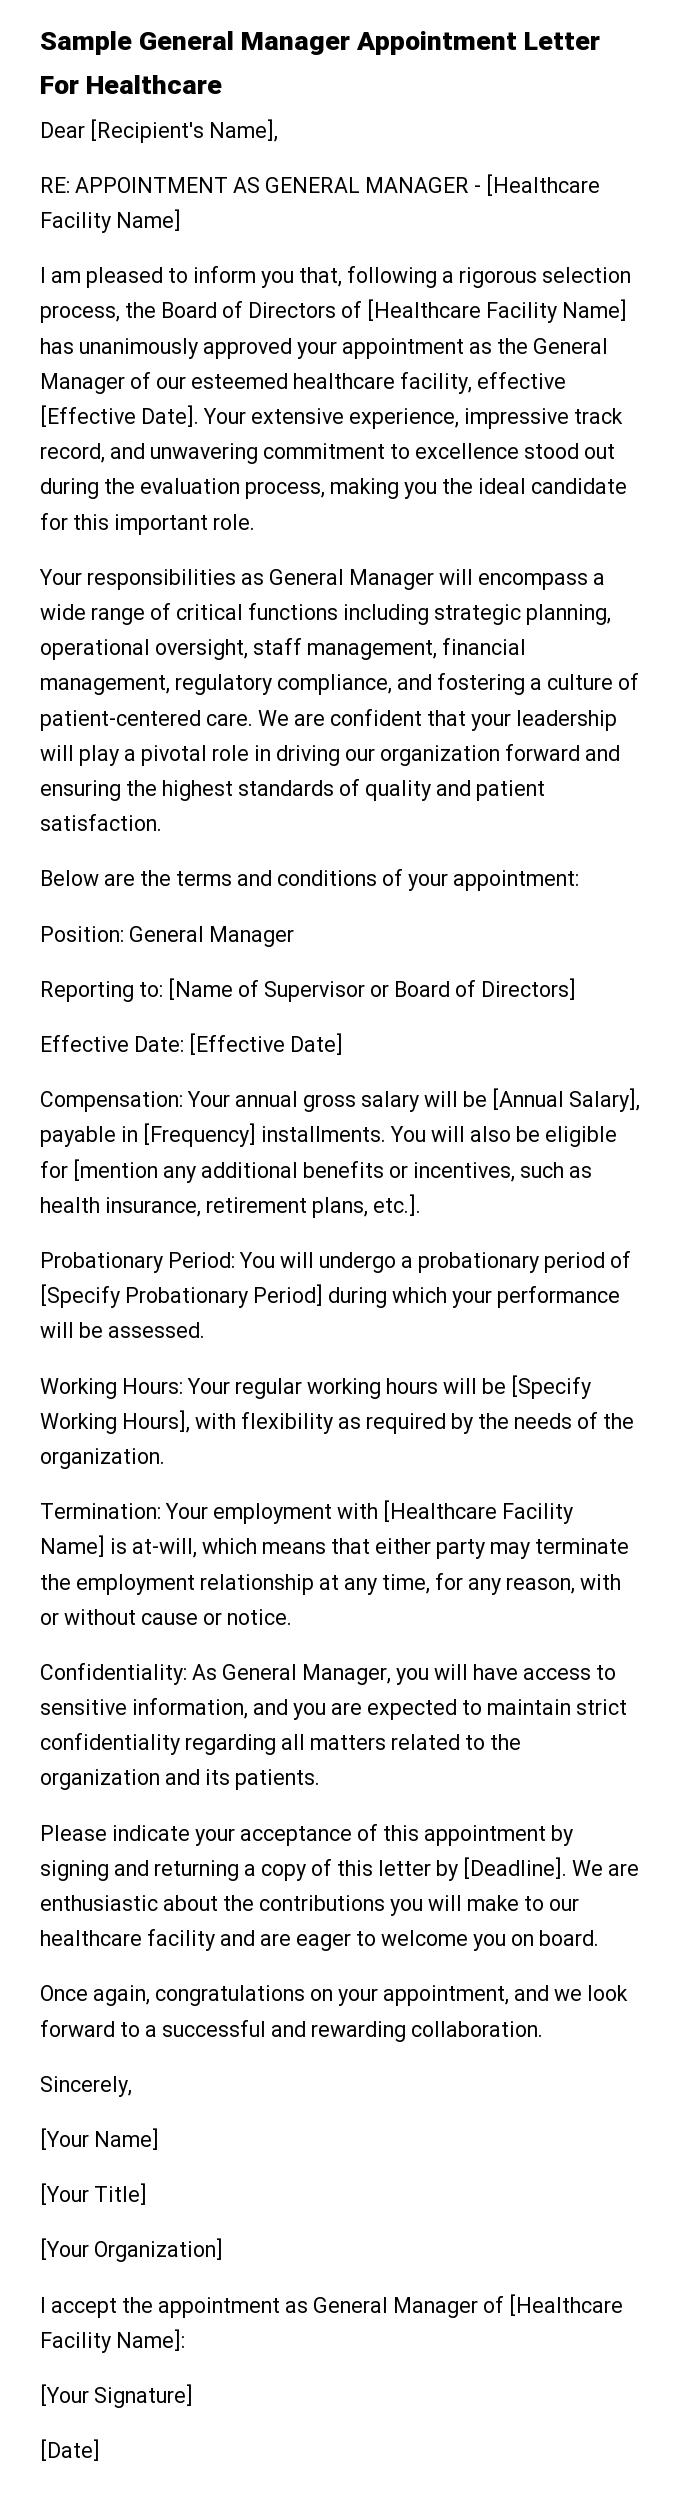 Sample General Manager Appointment Letter For Healthcare